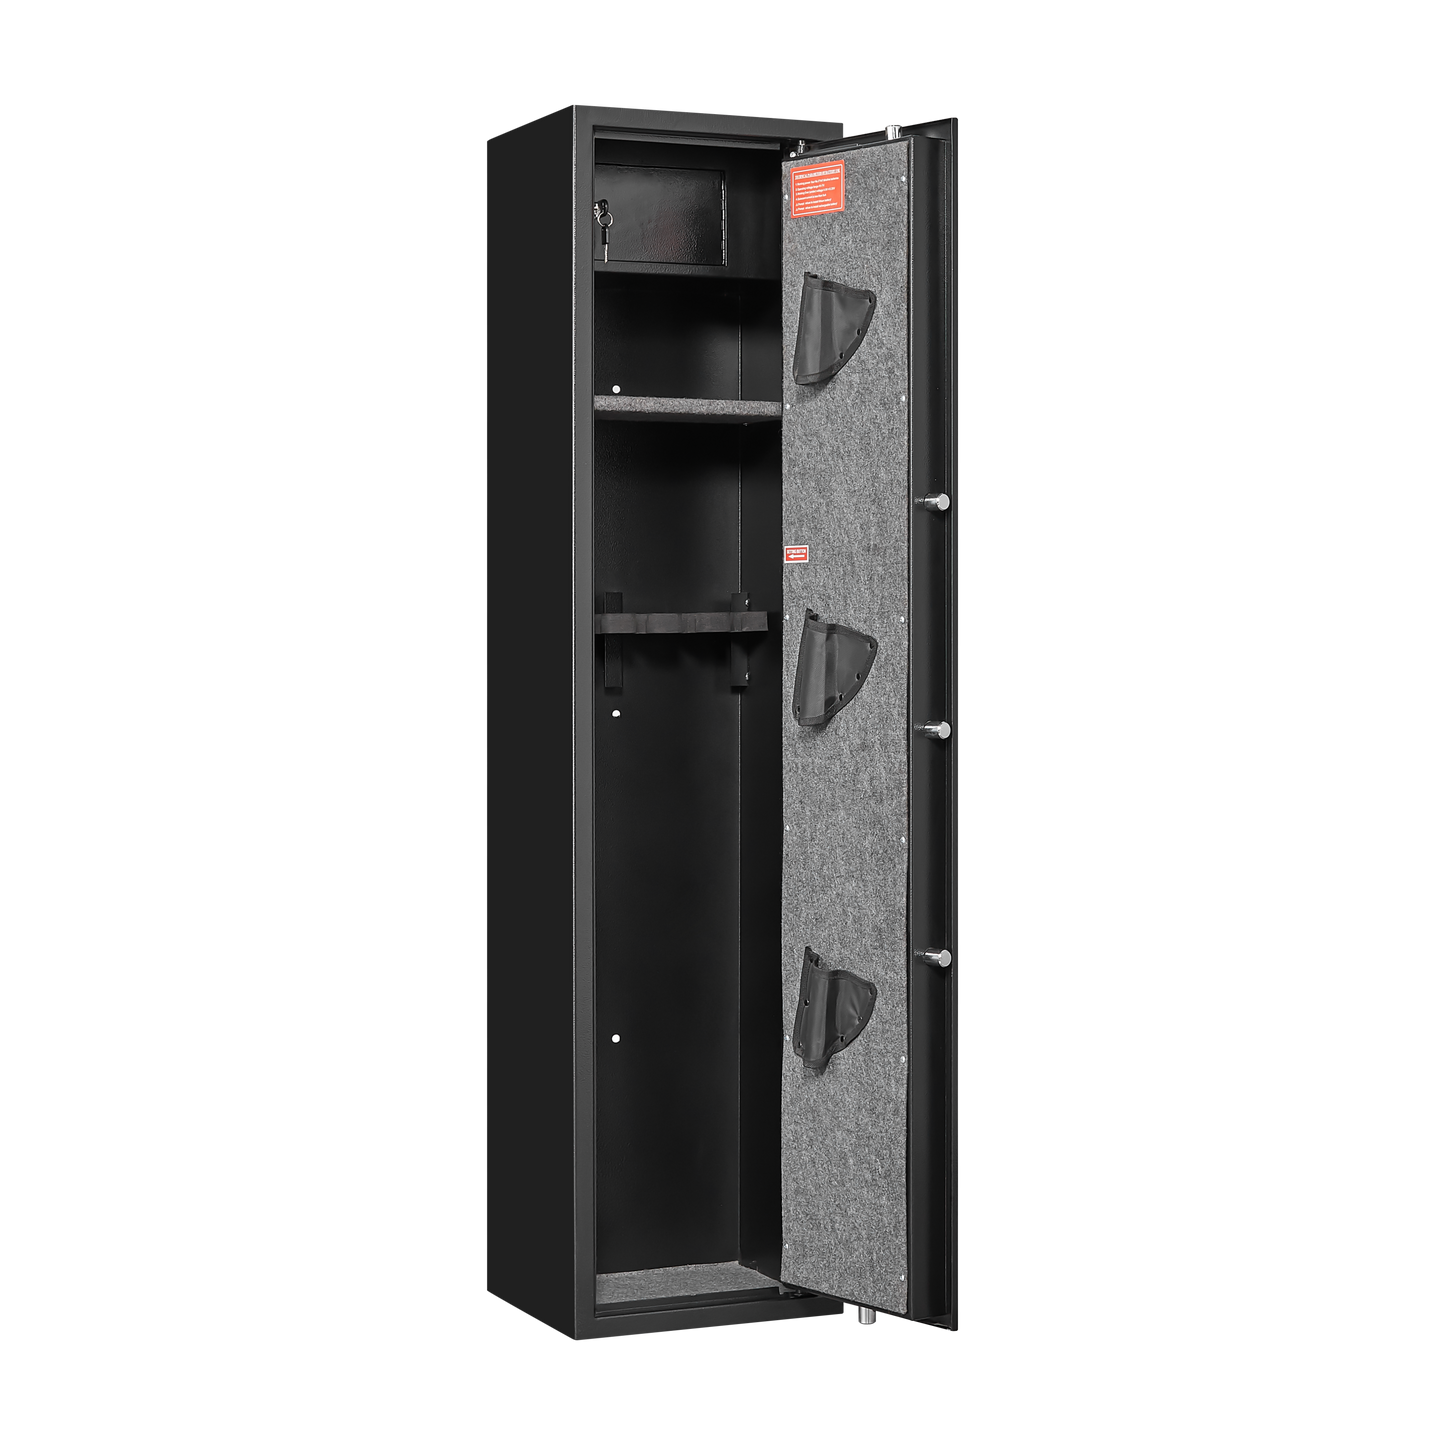 Secure Gun Cabinet with Password Lock: Stores 5 Rifles, 3 Pistols, and Includes Internal Storage Box and Magnetic Light